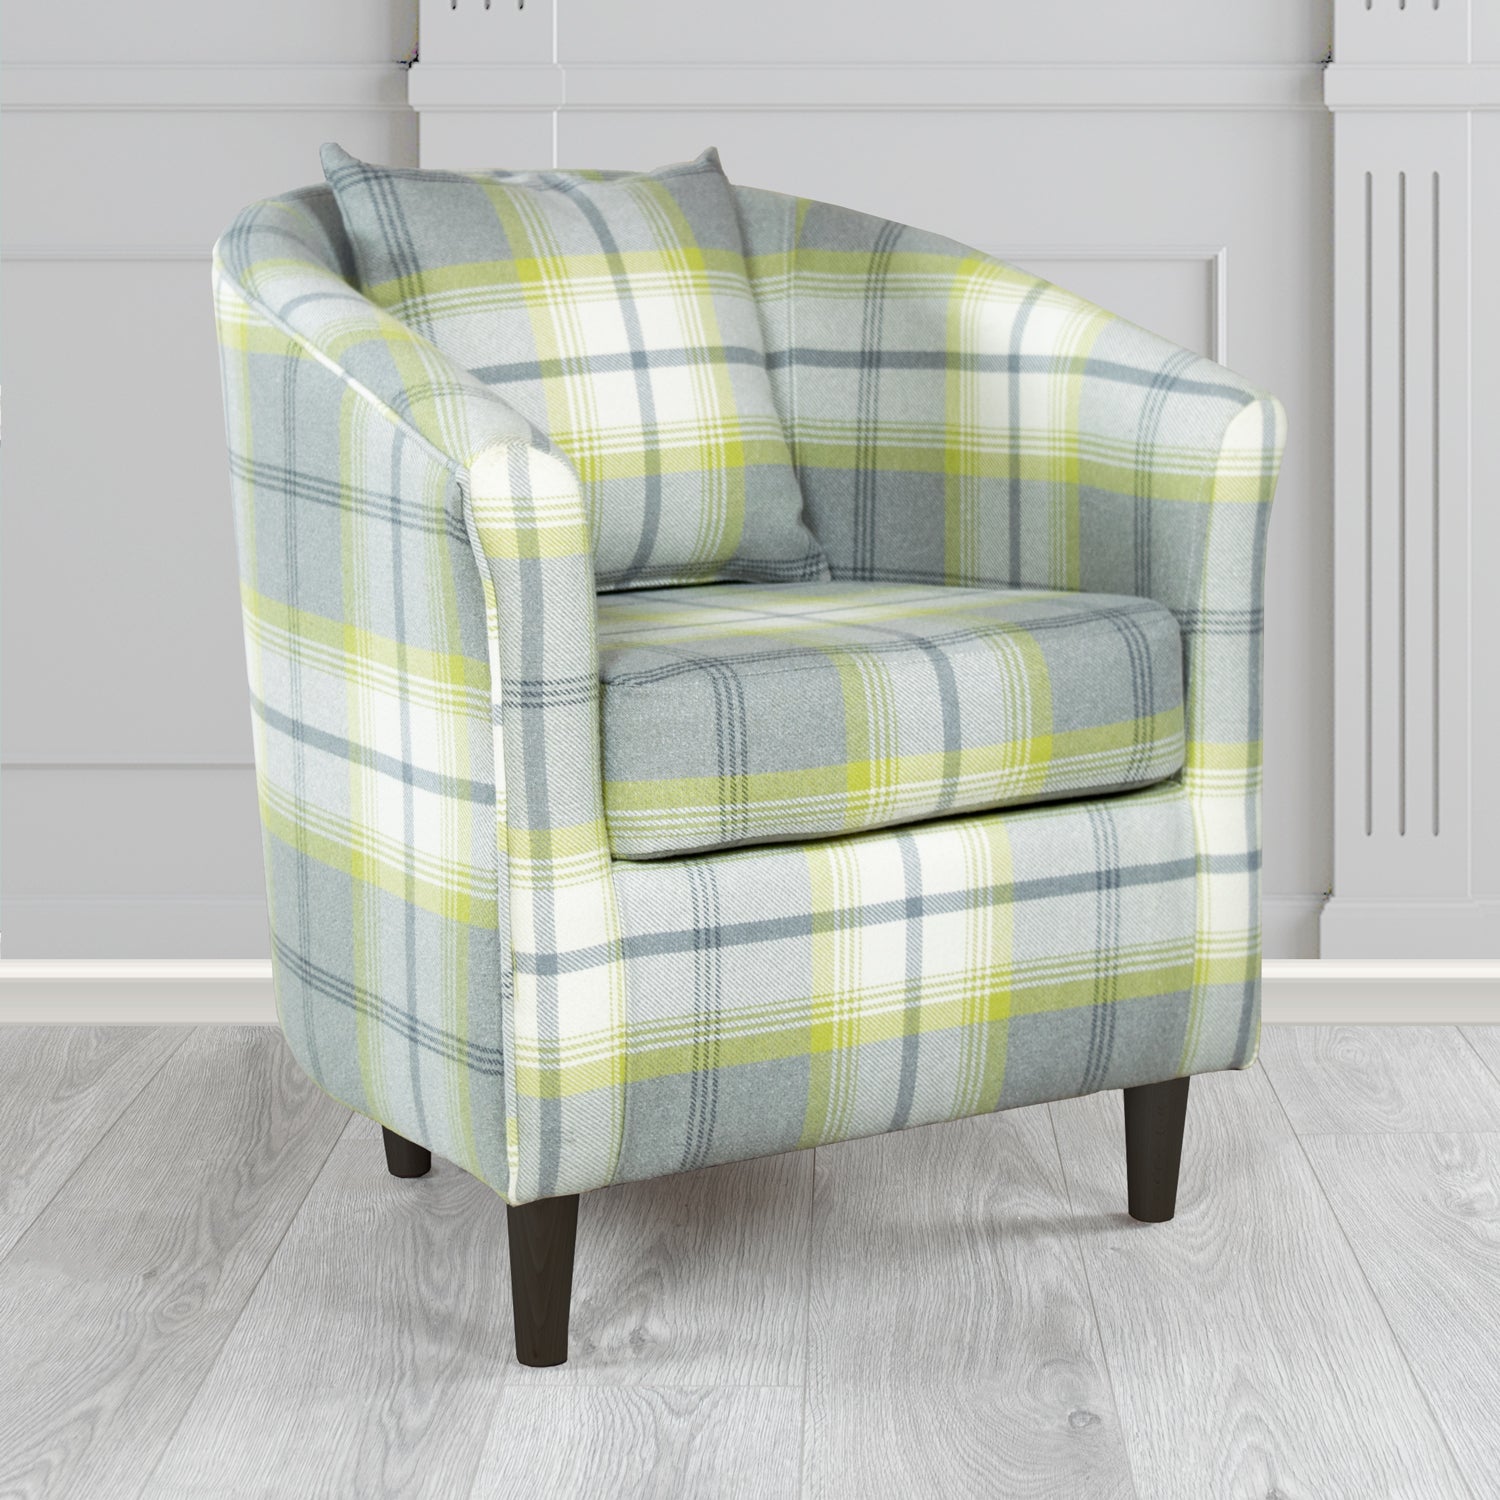 St Tropez Balmoral Citrus Check Tartan Fabric Tub Chair with Scatter Cushion (6627053240362)